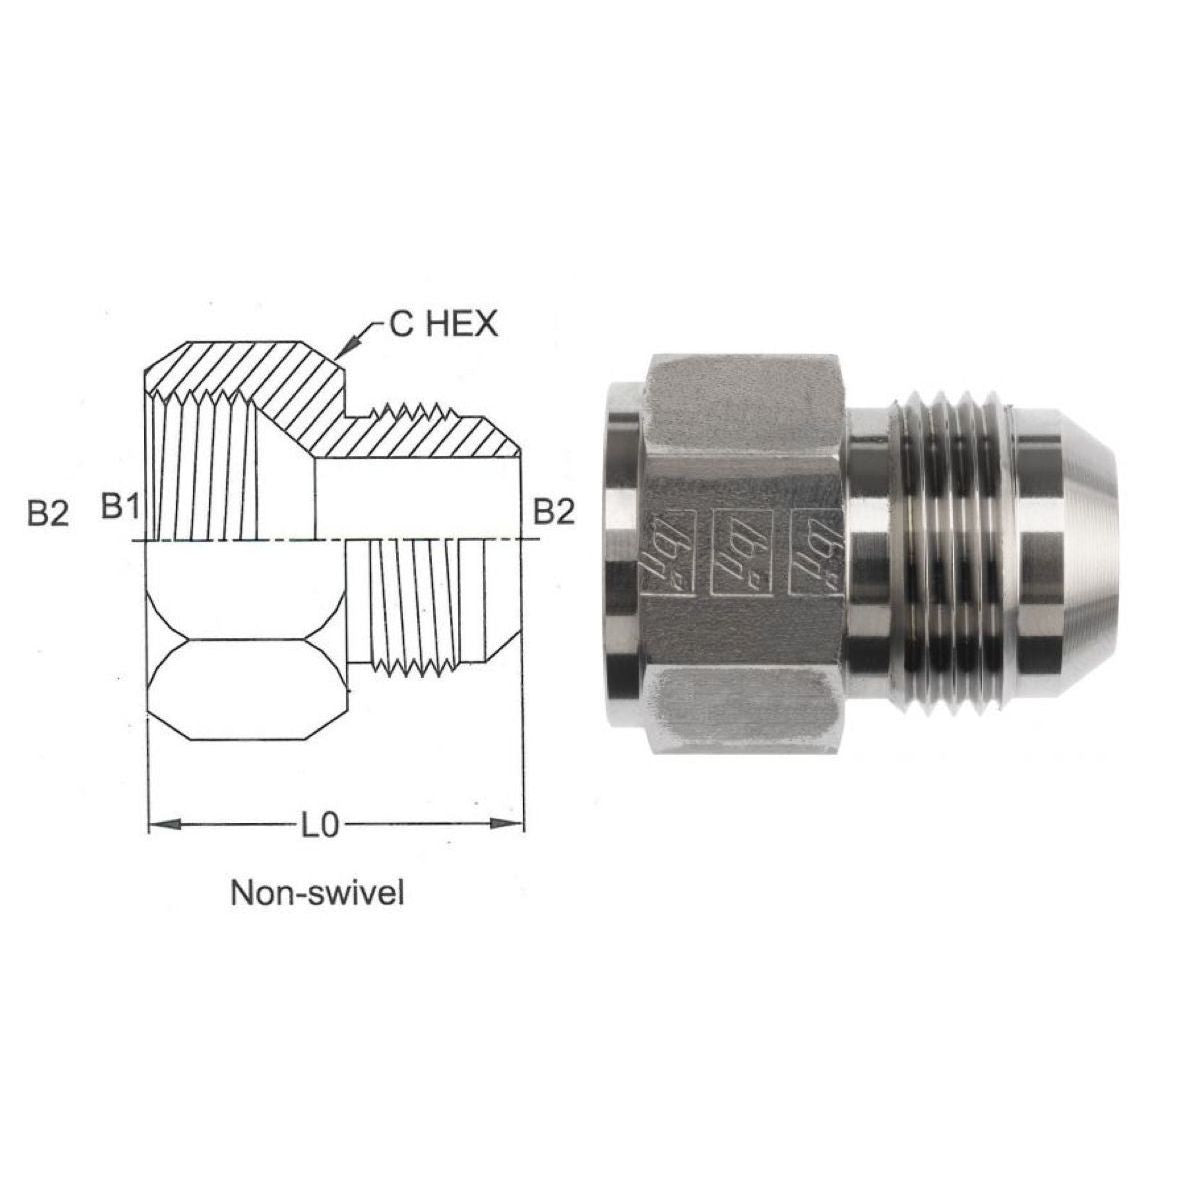 2406-24-20-SS : OneHydraulics Straight Reducer, 1.5 (1-1/2) Female JIC x 1.25 (1-1/4) Male JIC, Stainless Steel